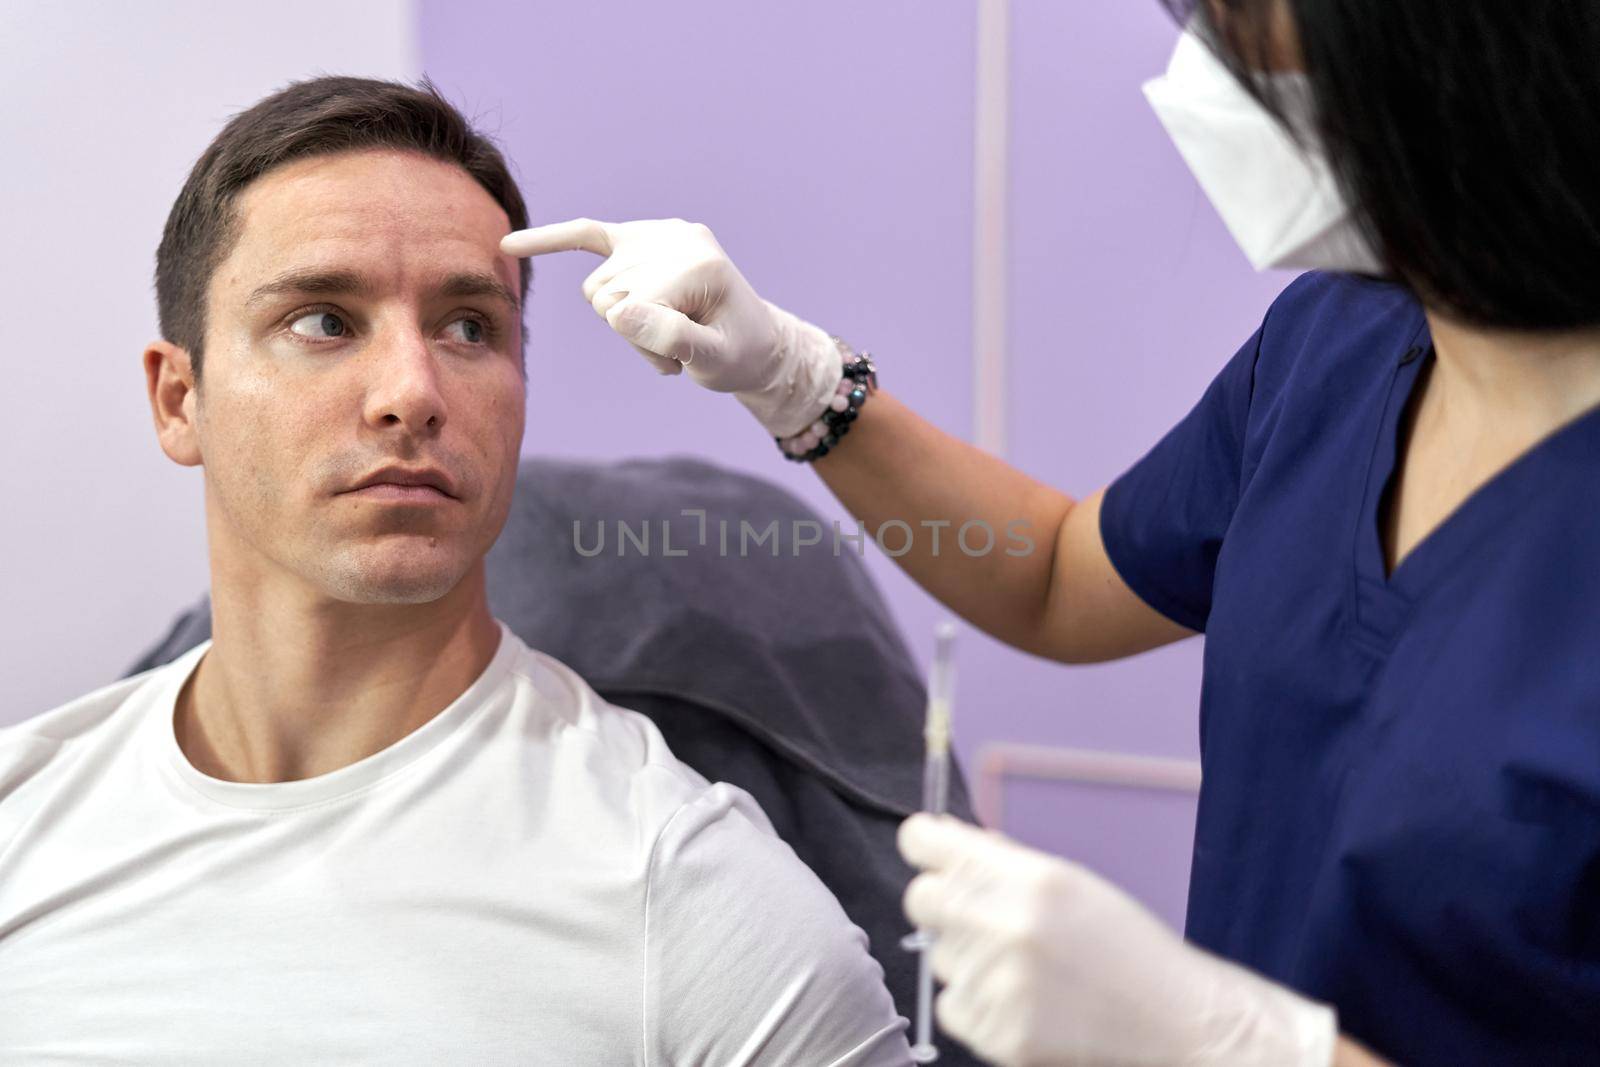 Doctor pointing to the spot where she will inject a botox injection to a man for a beauty treatment